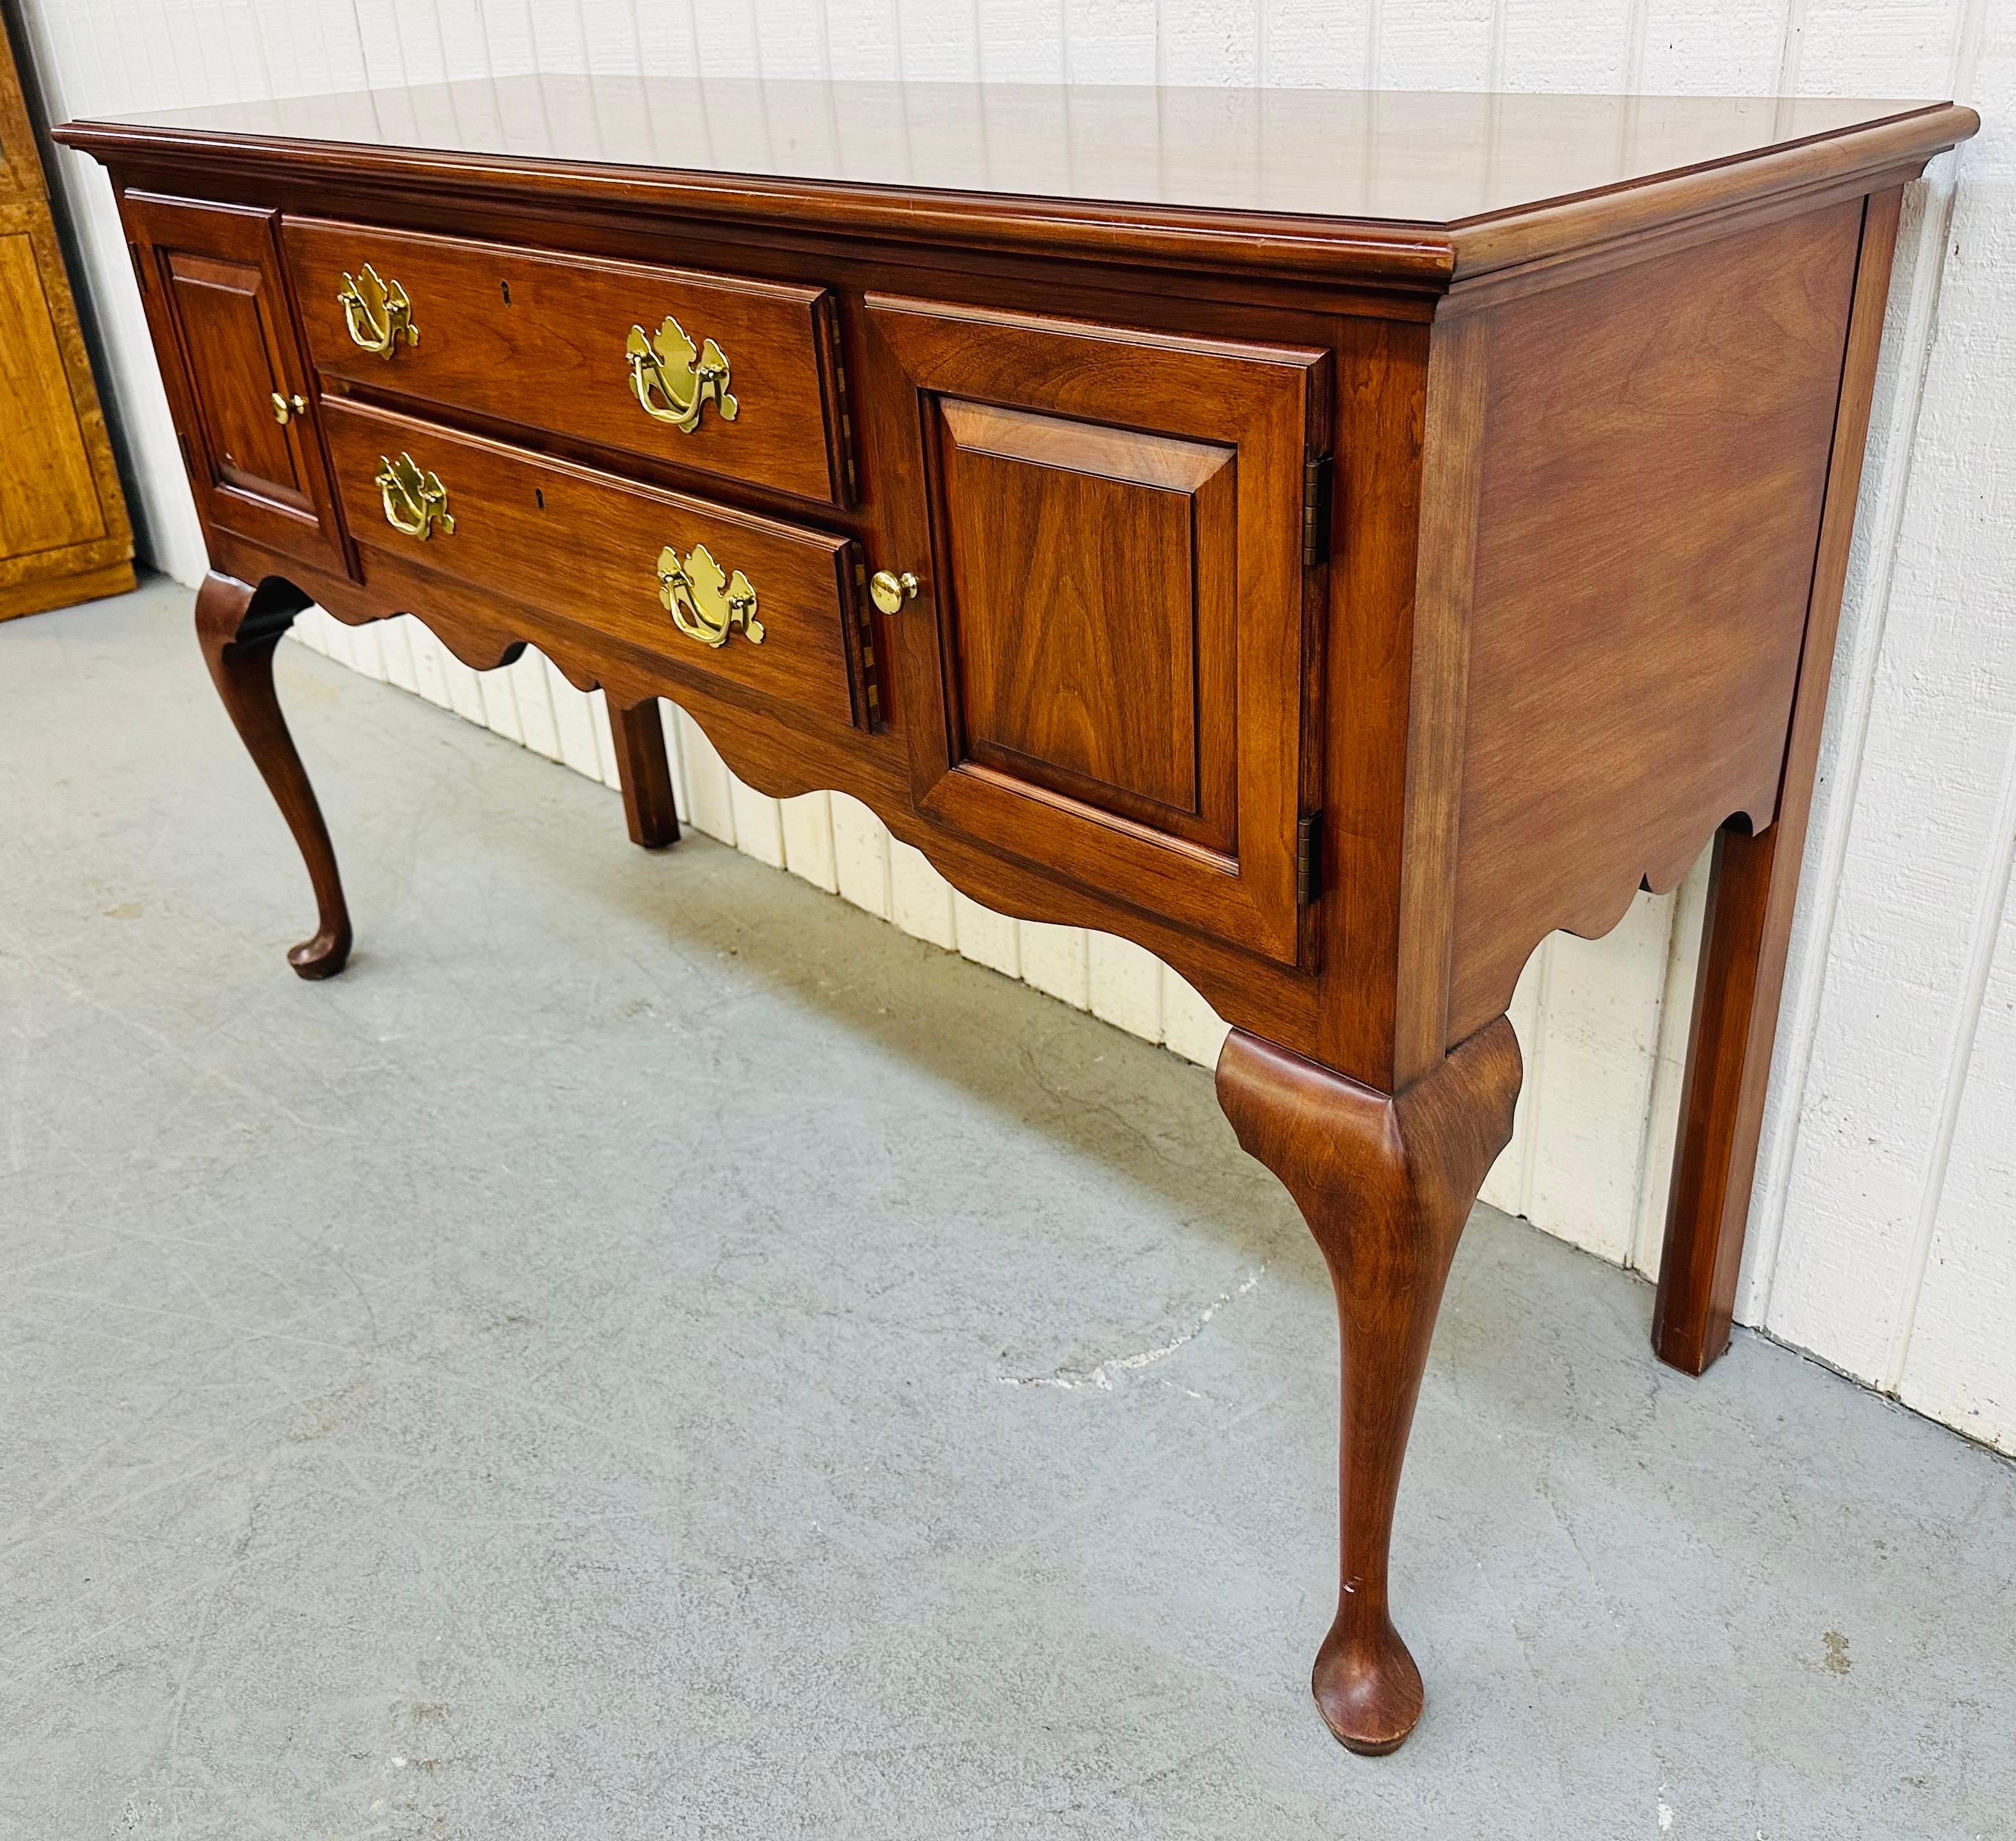 This listing is for a 1993 Henkel Harris Cherry Buffet. Featuring a rectangular top, two doors that open up to storage space, two drawers that pull open for silverware storage, a Queen Anne style leg, original brass hardware, and beautiful Cherry